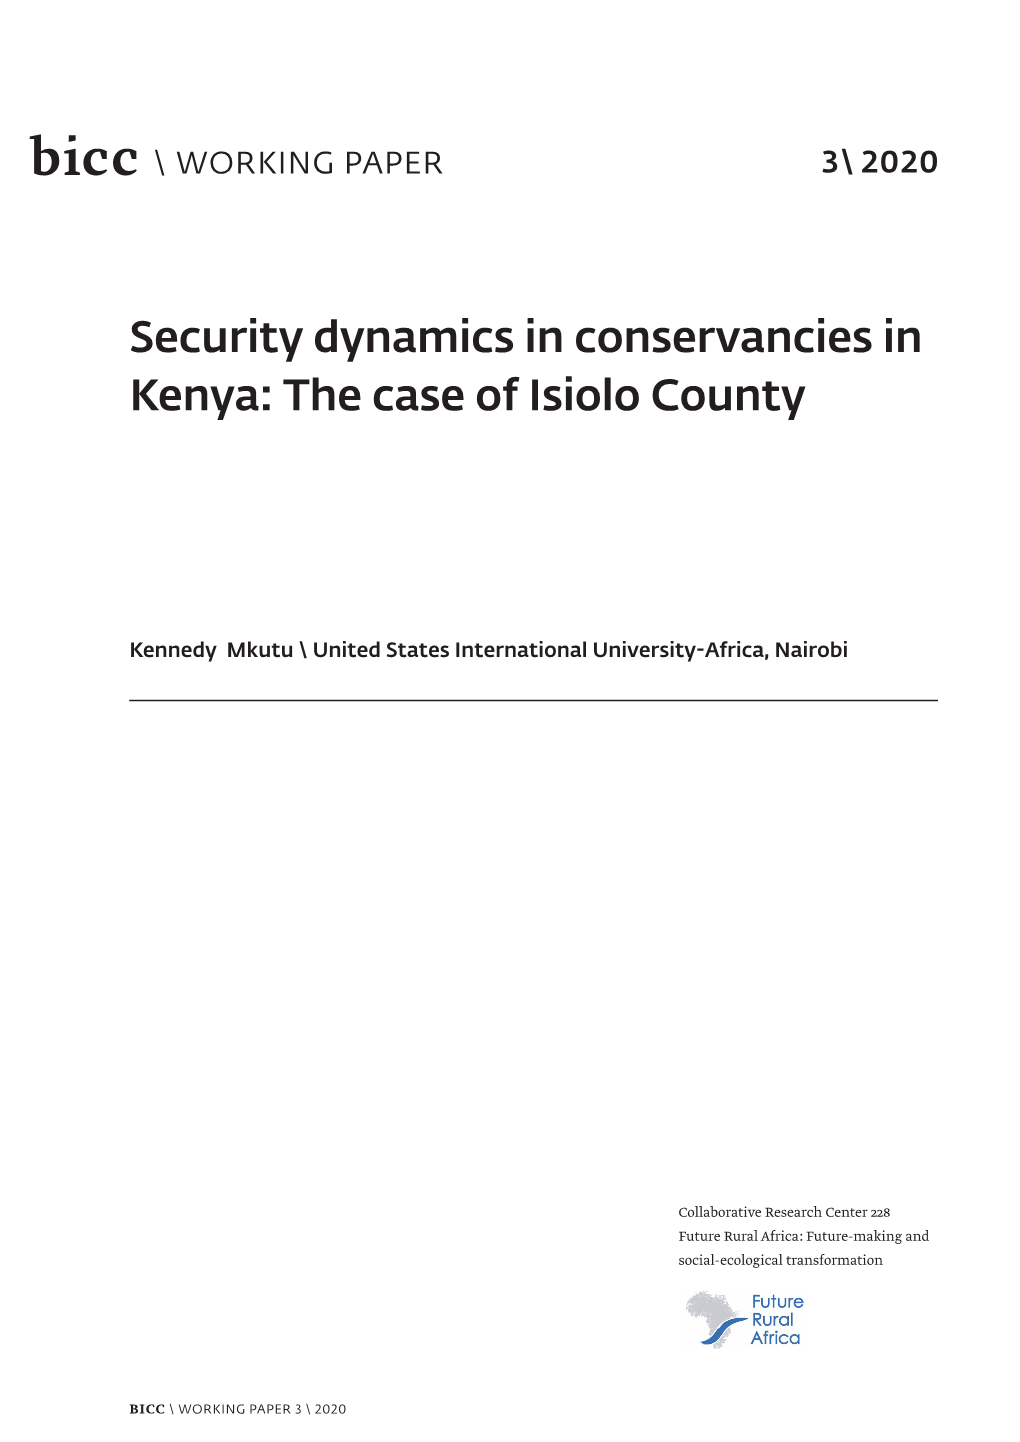 Security Dynamics in Conservancies in Kenya: the Case of Isiolo County